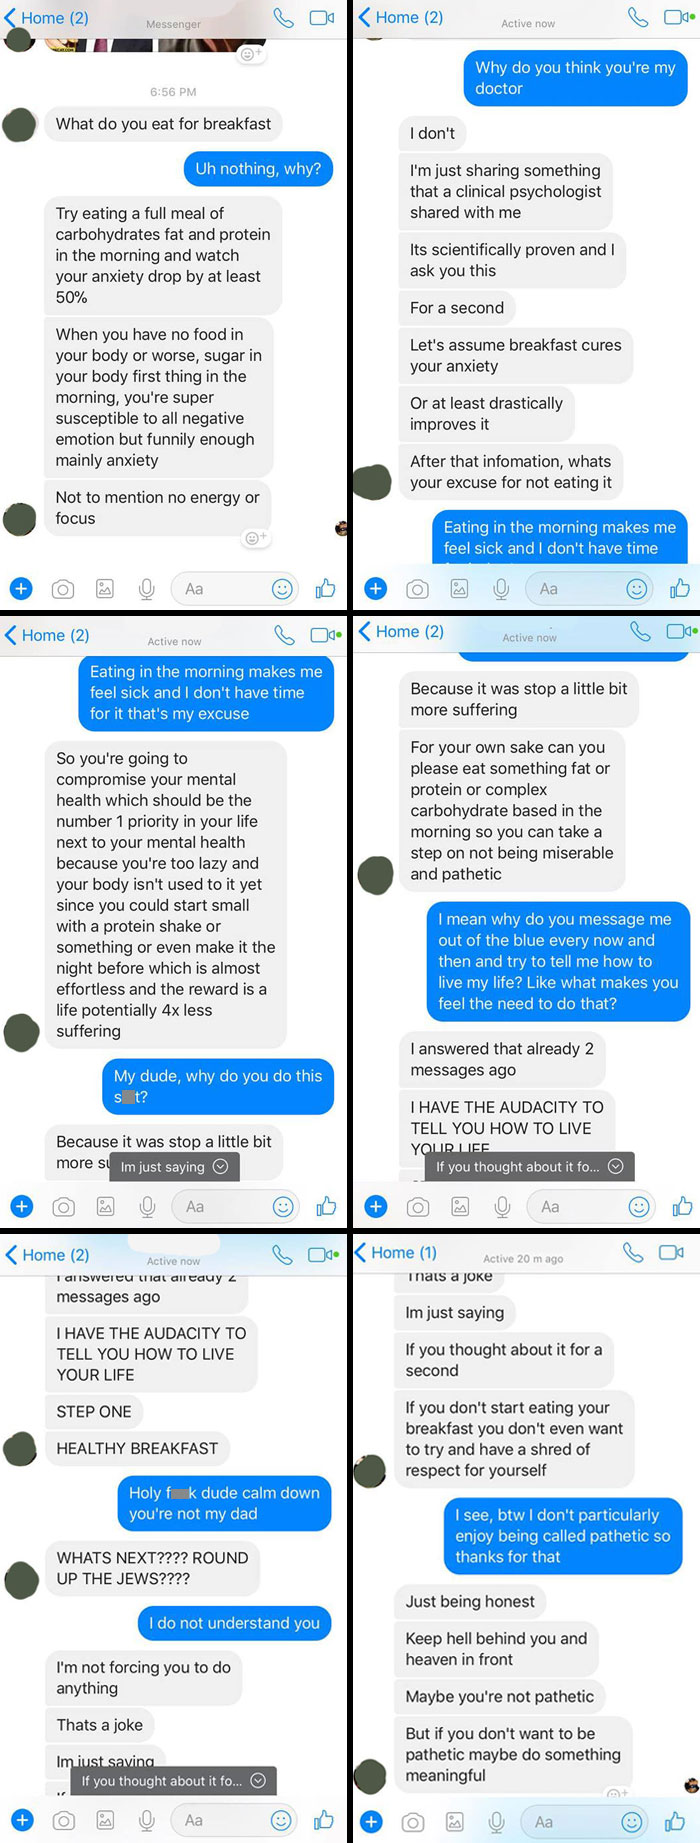 Let Me Introduce You To My Sister's Ex She Met On Tinder, Who Messages Her And Spouts Things Like This Every Few Months On A Whim (With No Other Contact)